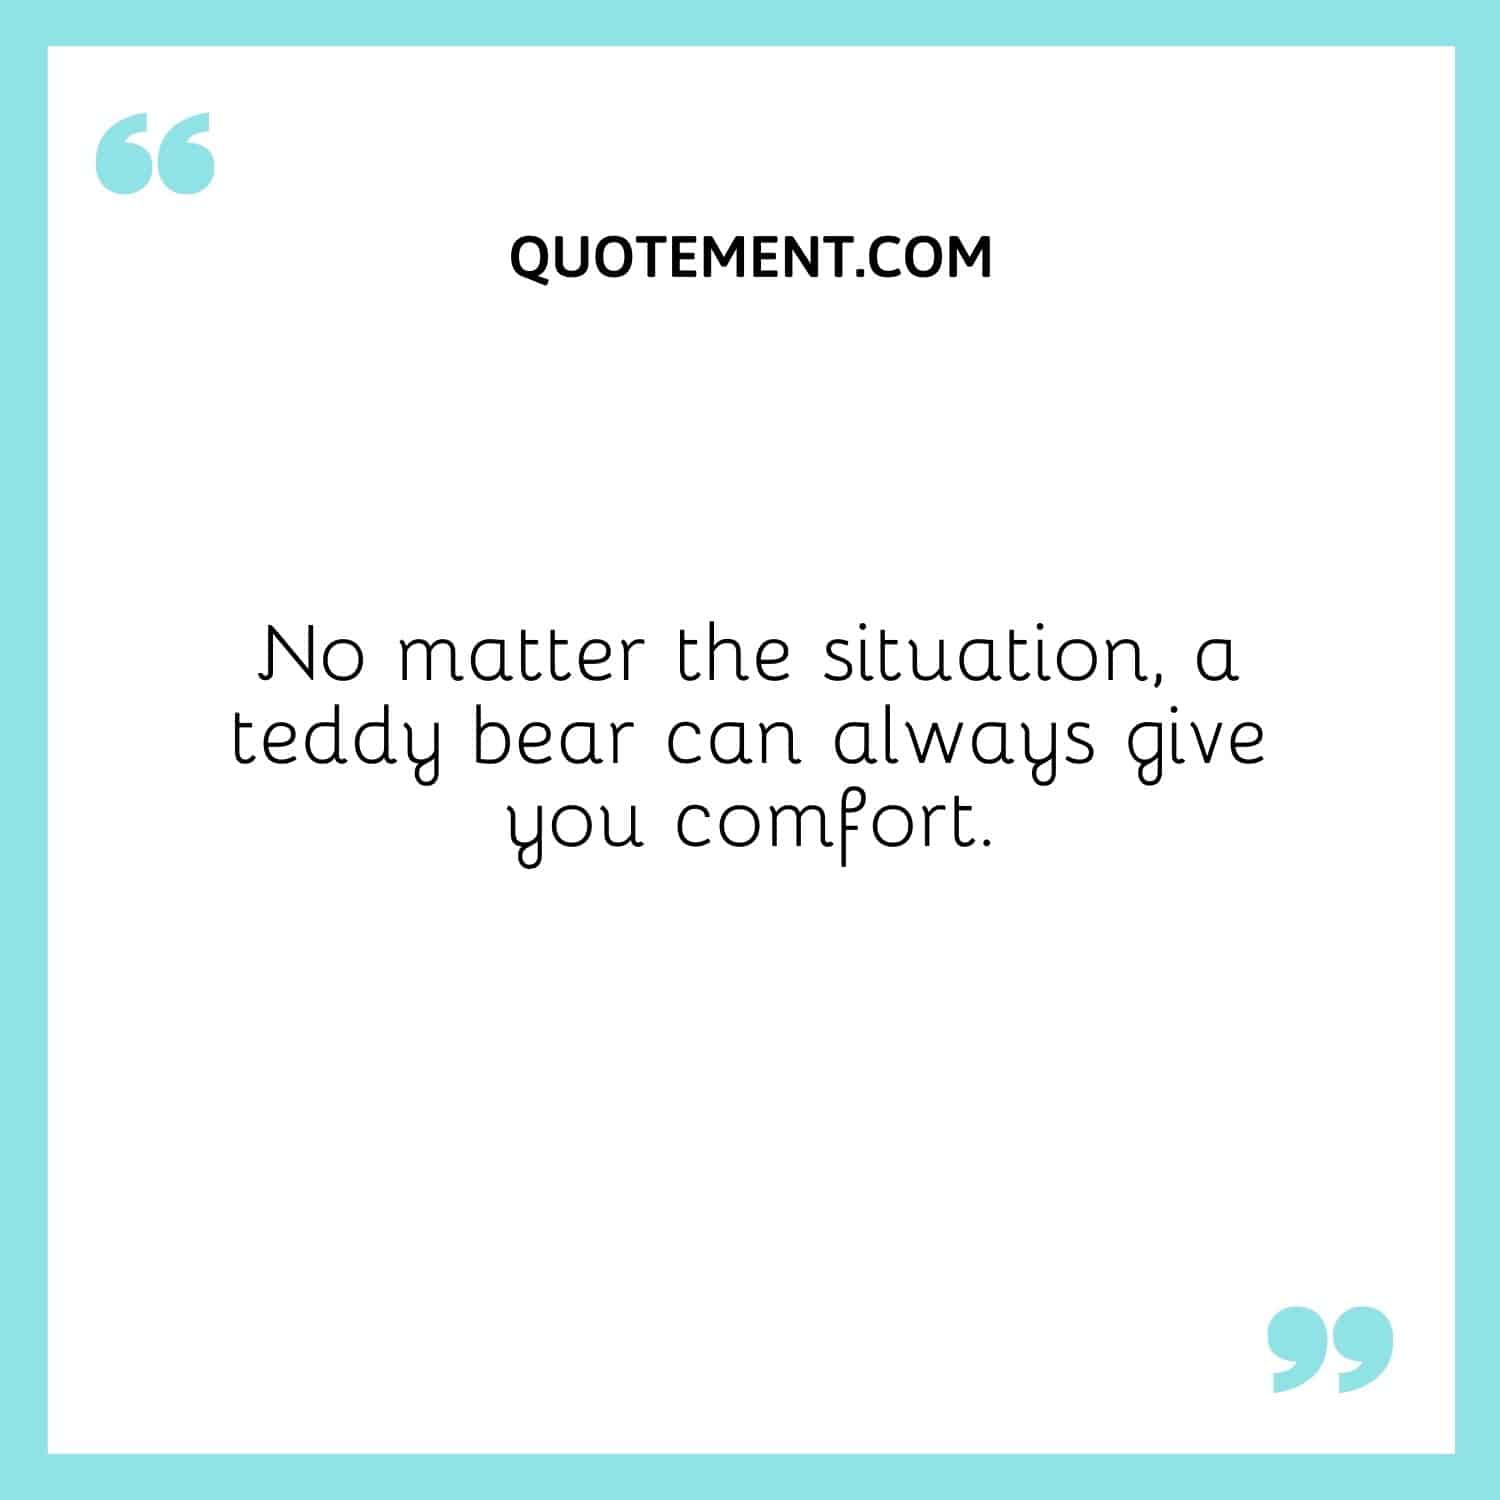 teddy bear can always give you comfort